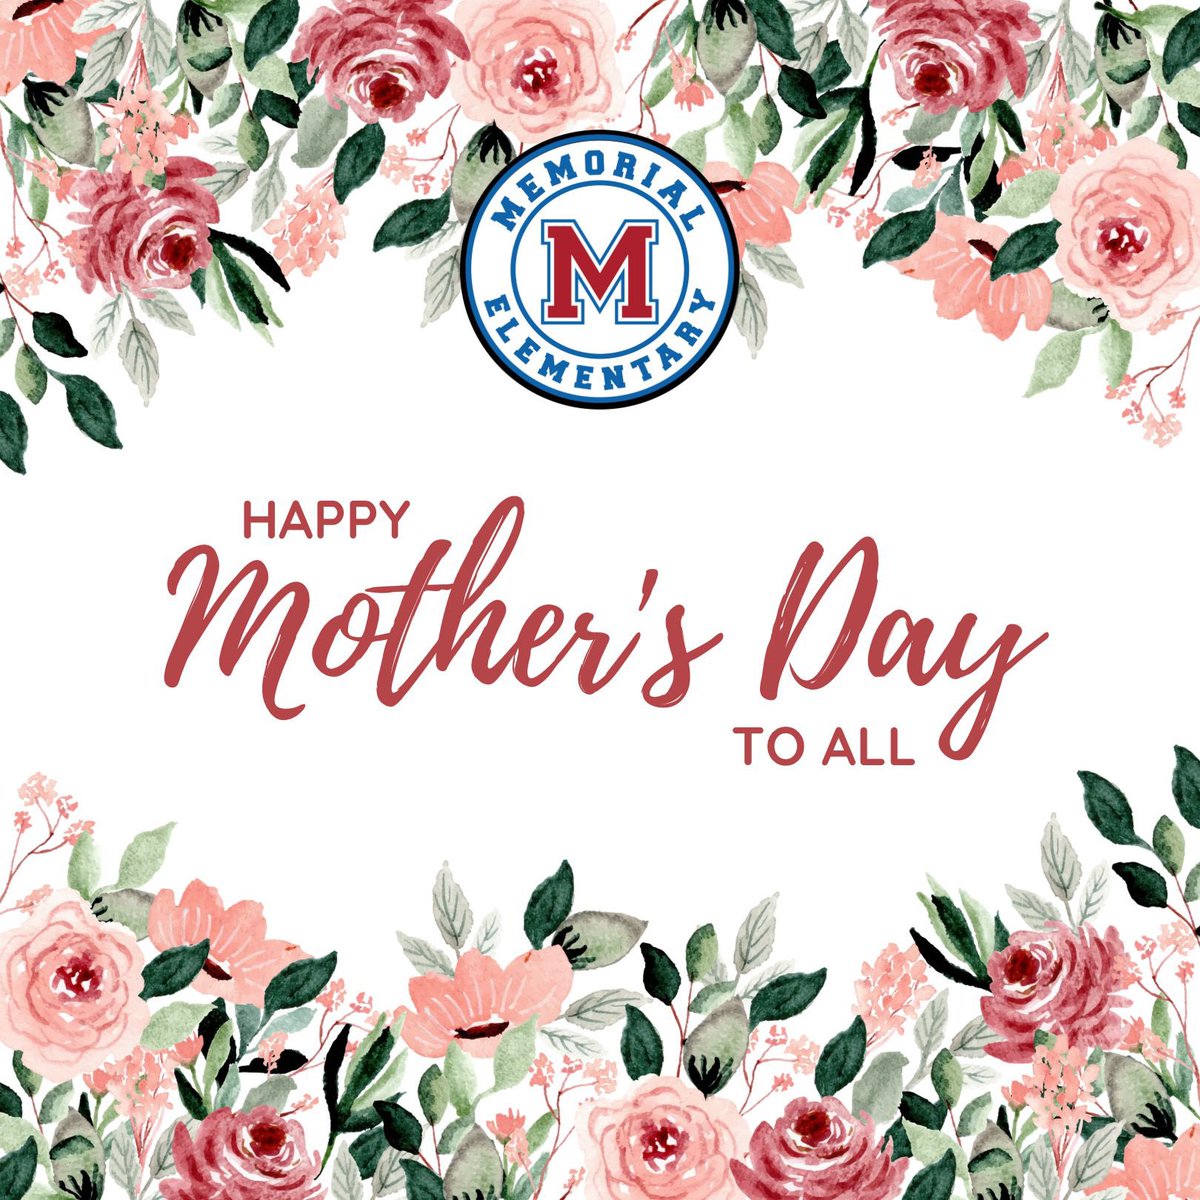 Happy Mother’s Day! 💕 Wishing each and every mom, mom-to-be, mother-figure, and especially the educator-moms a beautiful day. #HappyMothersDay #HISDMemorialPTO #BlessedWithTheBest